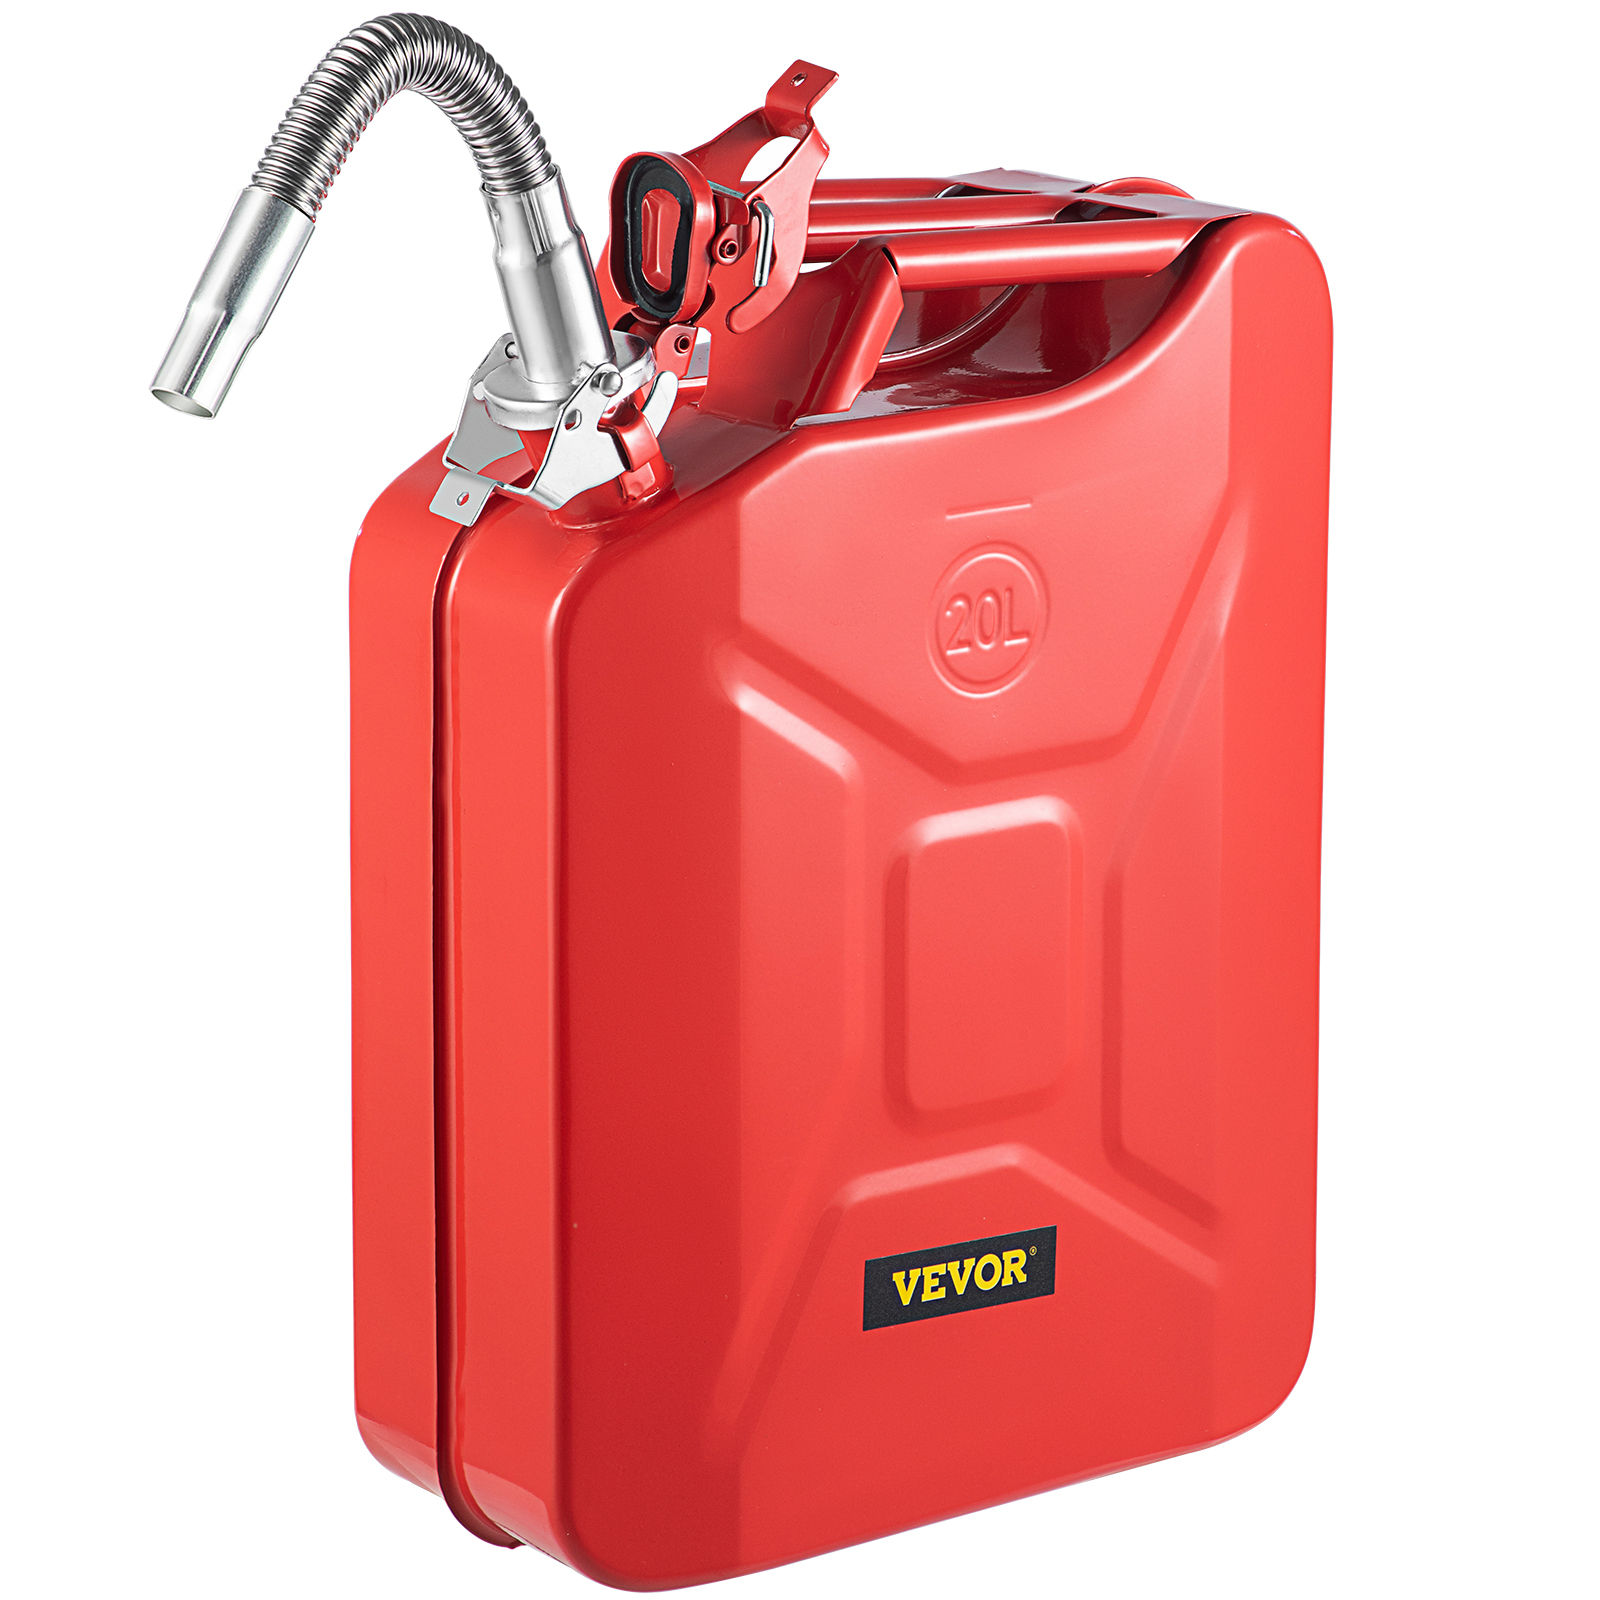 VEVOR Jerry Can Gas Can 5.3 Gallon / 20 L Portable Steel Jerry Can with Flexible Spout System Rustproof & Heat-Resistant Steel Fuel Tank for Cars